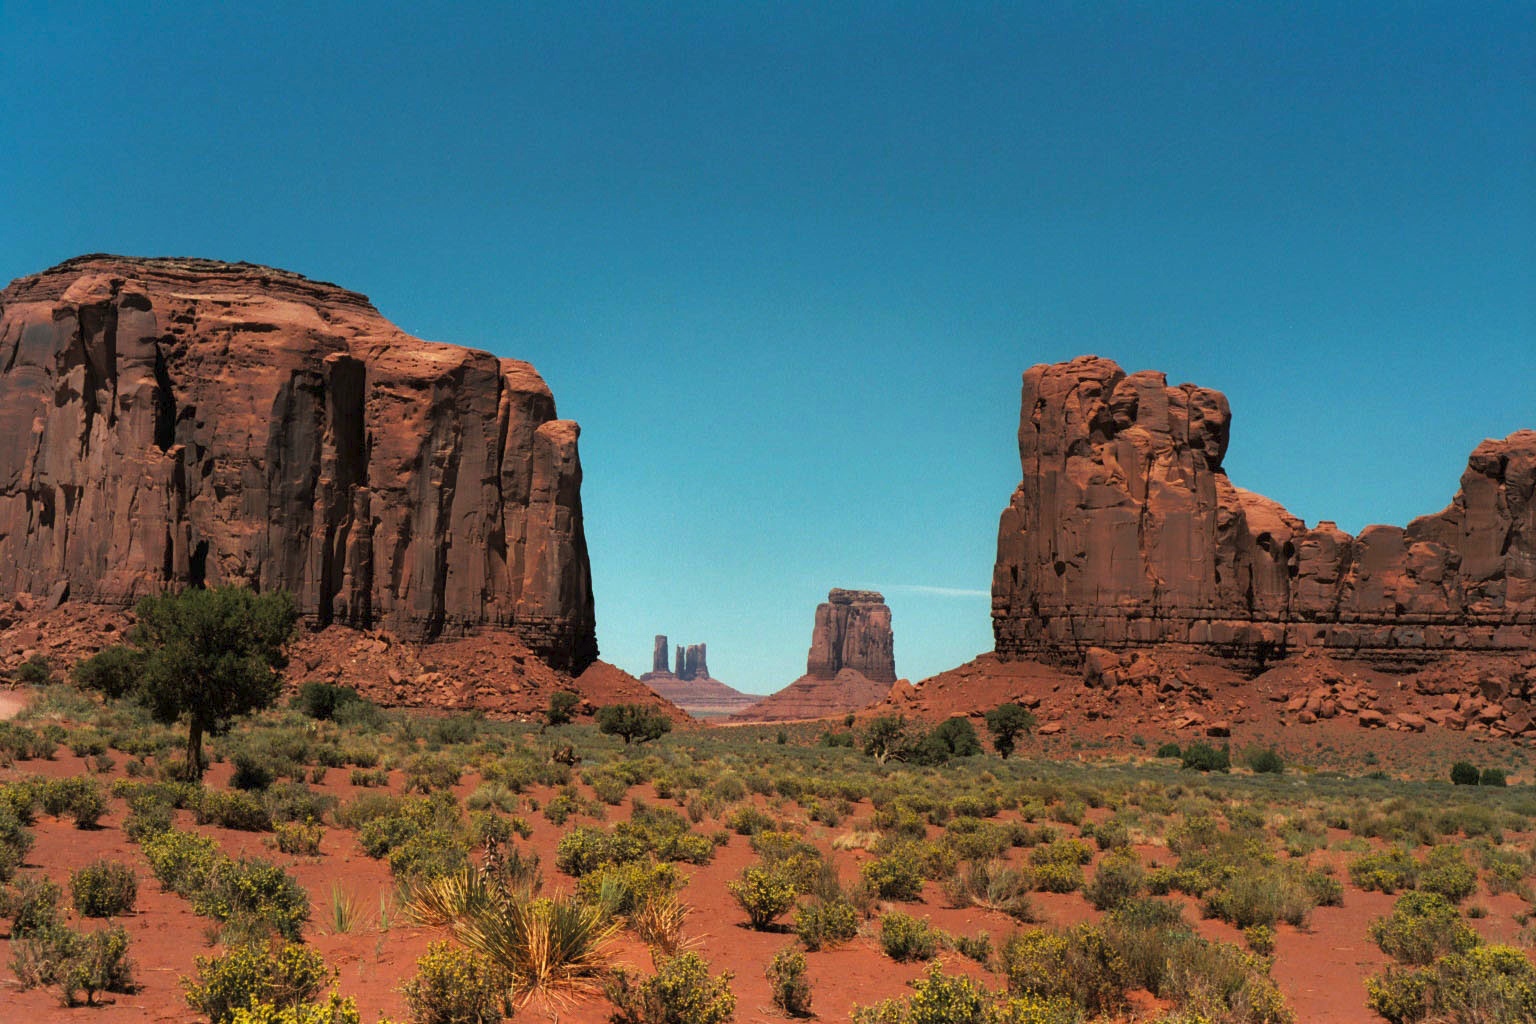 Huge, crumbling, red sandstone formations, as seen in many old Westerns.